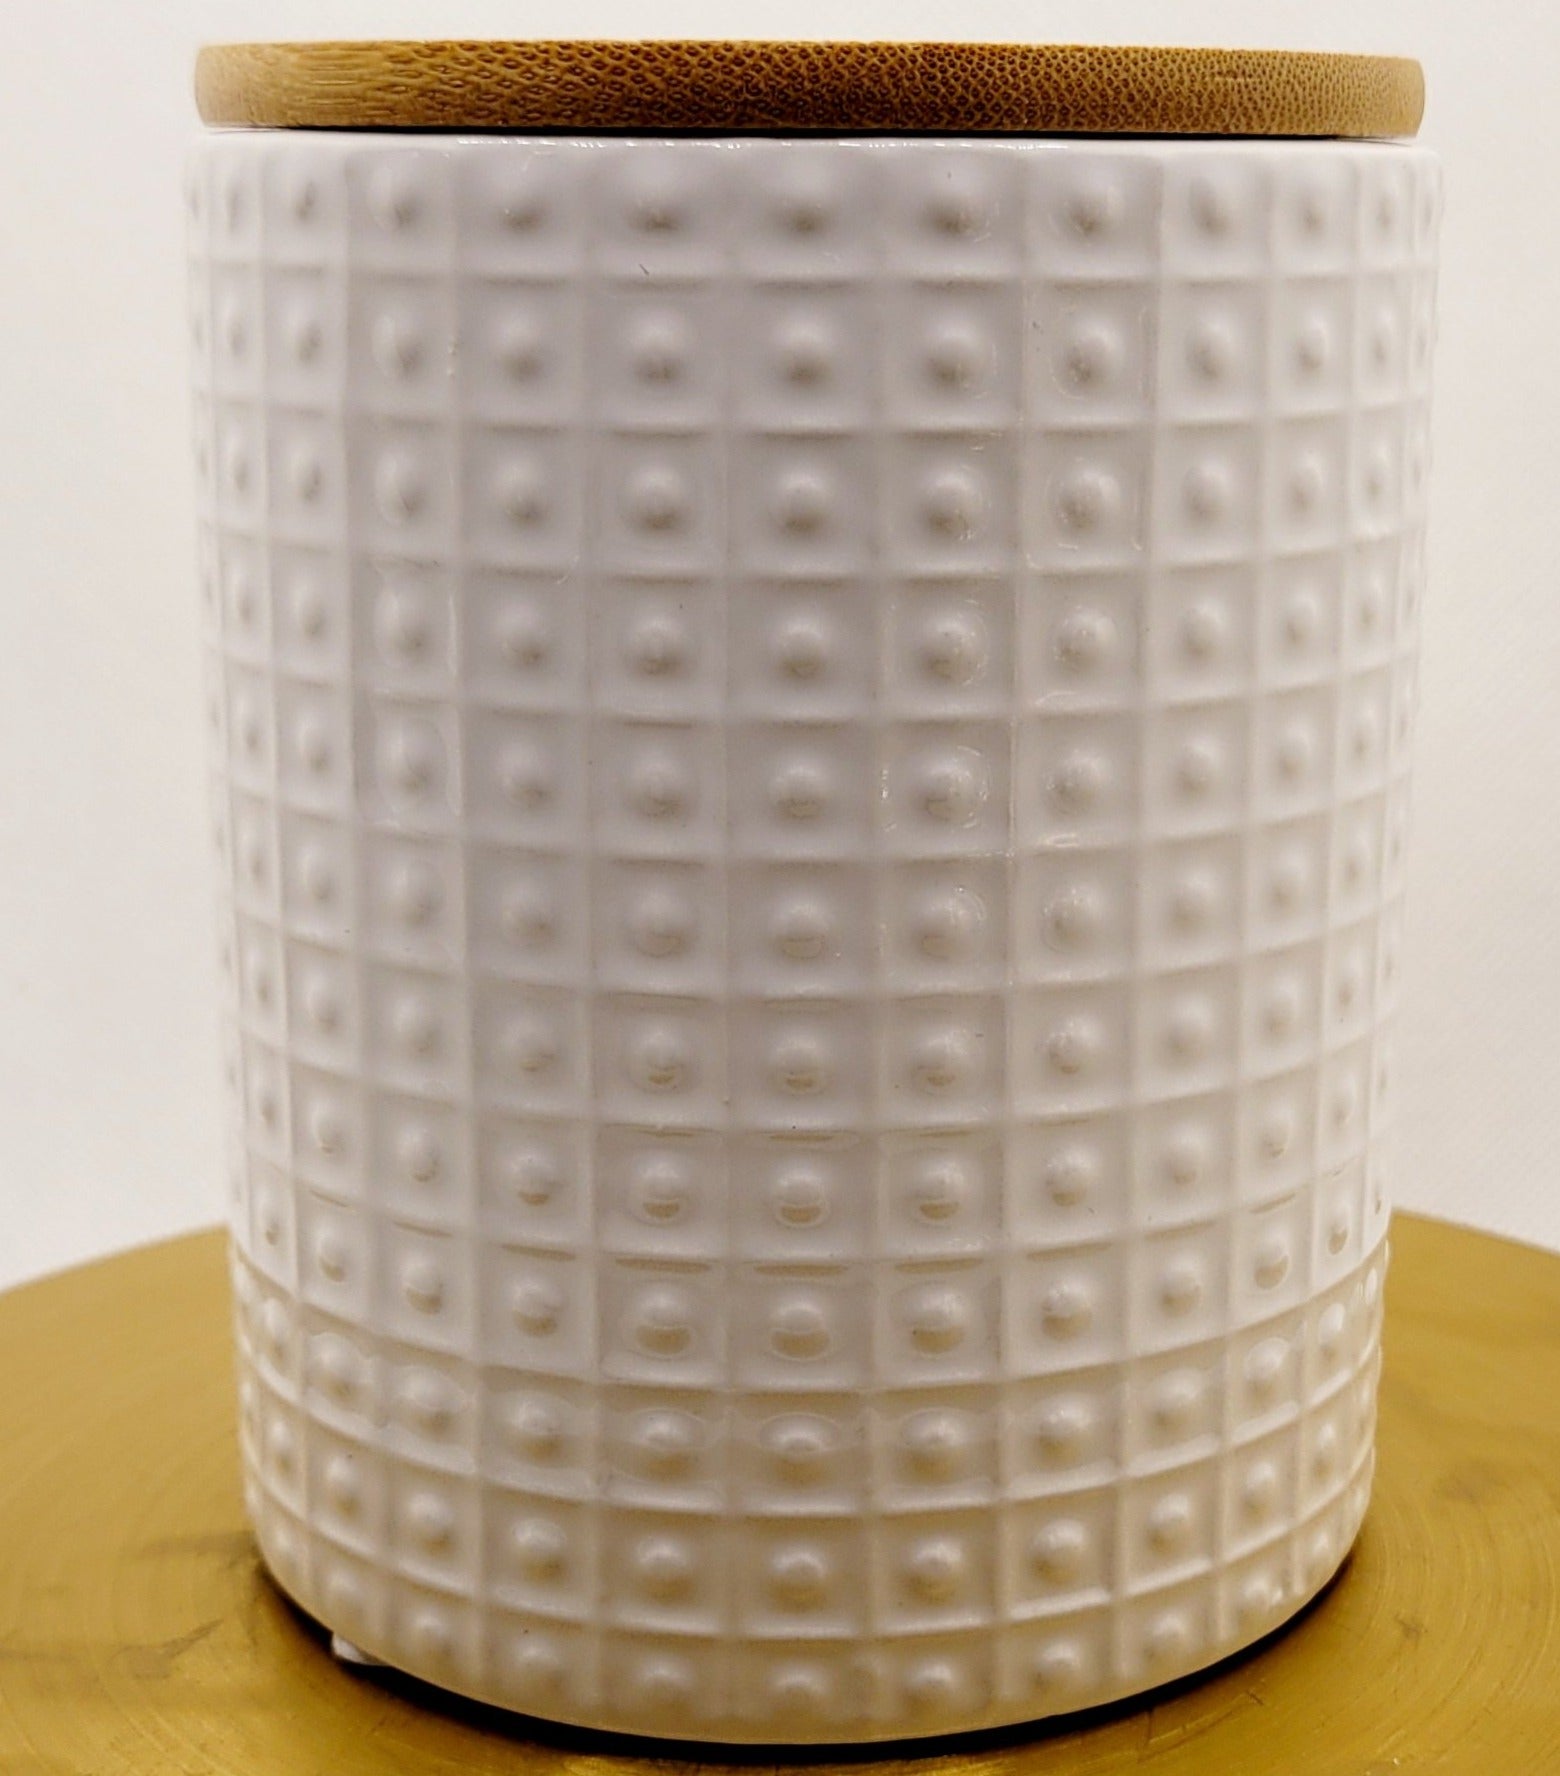 White Glazed Ceramic Style with Wooden Lid - Embossed Squares + Dots